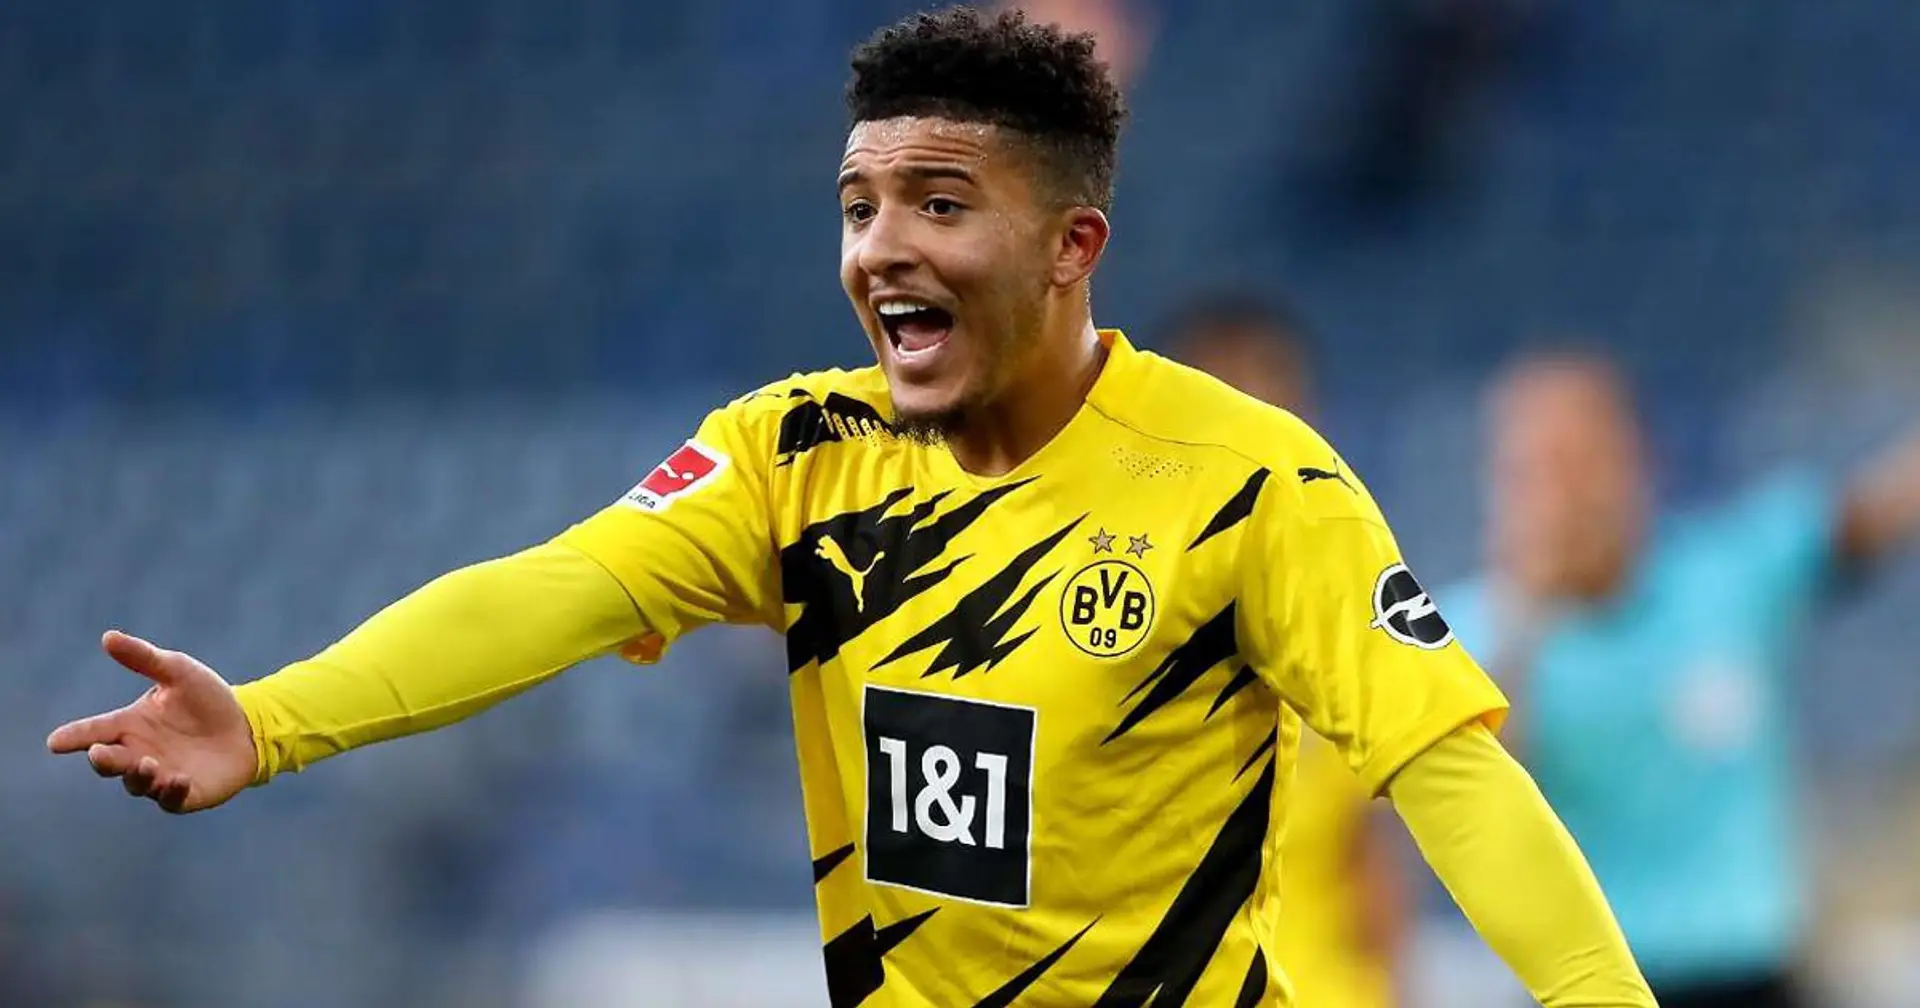 Fabrizio Romano gives key update on United’s negotiation process for Sancho deal